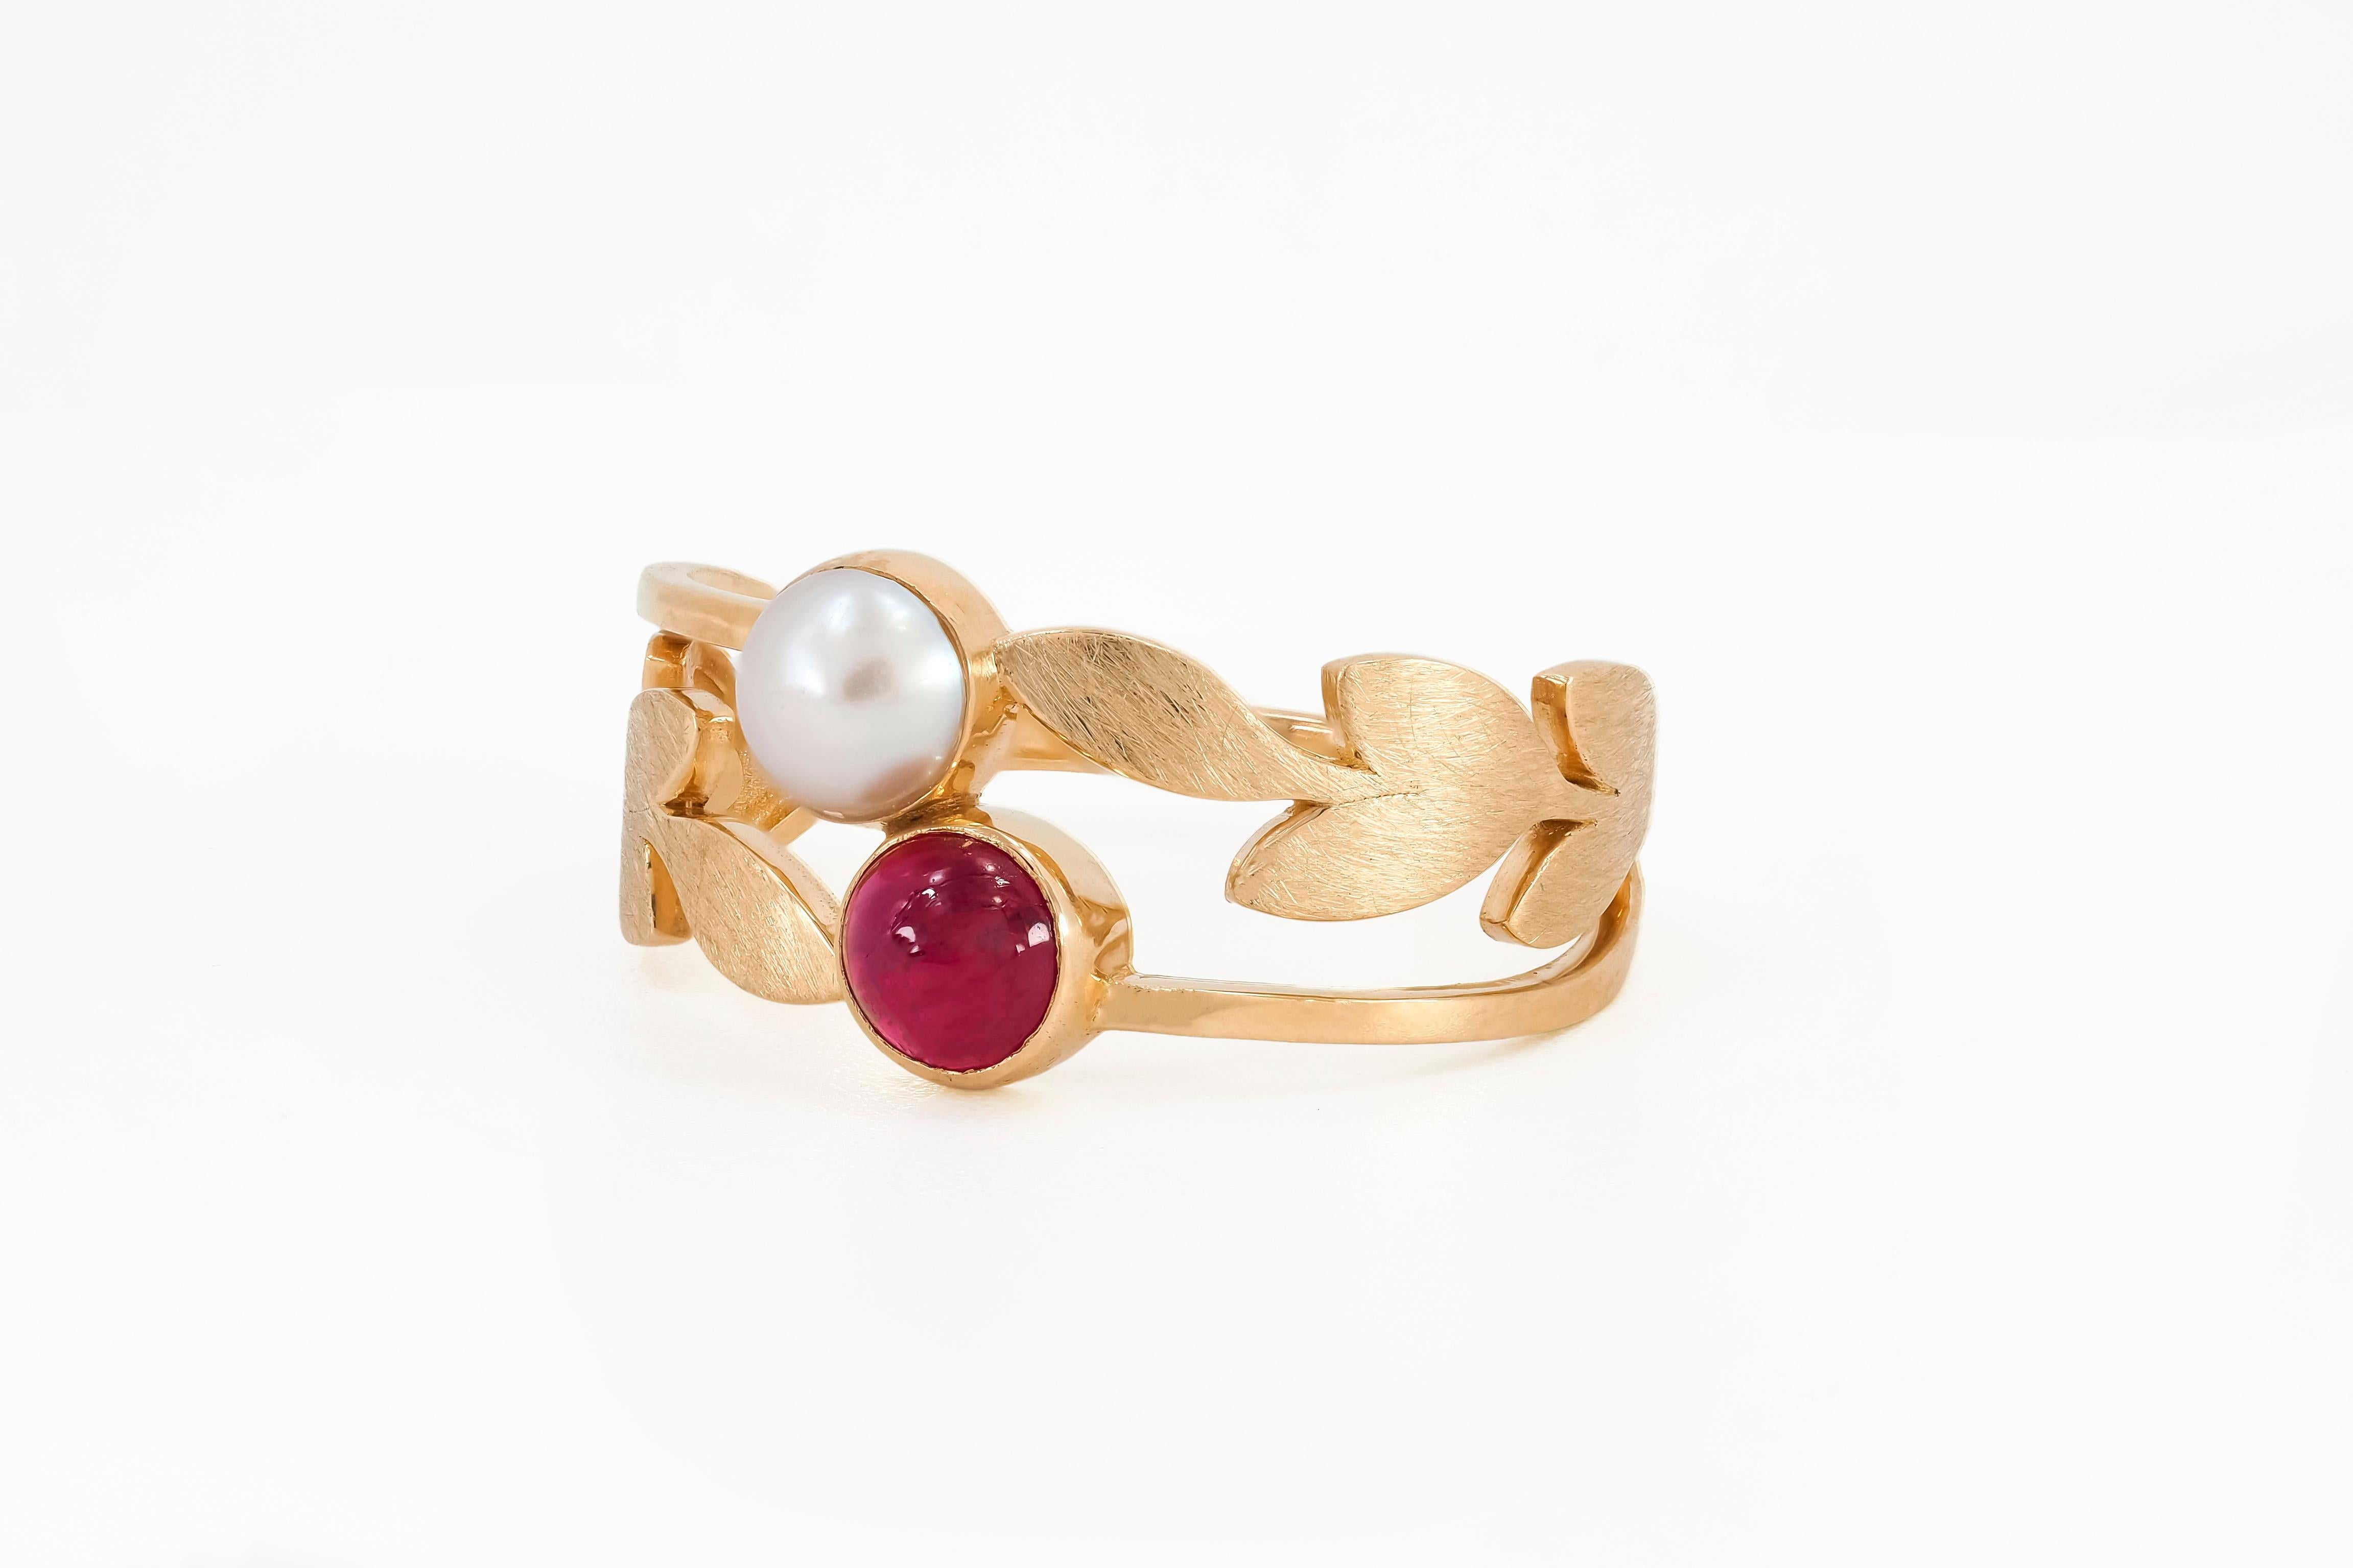 Women's 14k Gold Ring with Ruby and Pearl